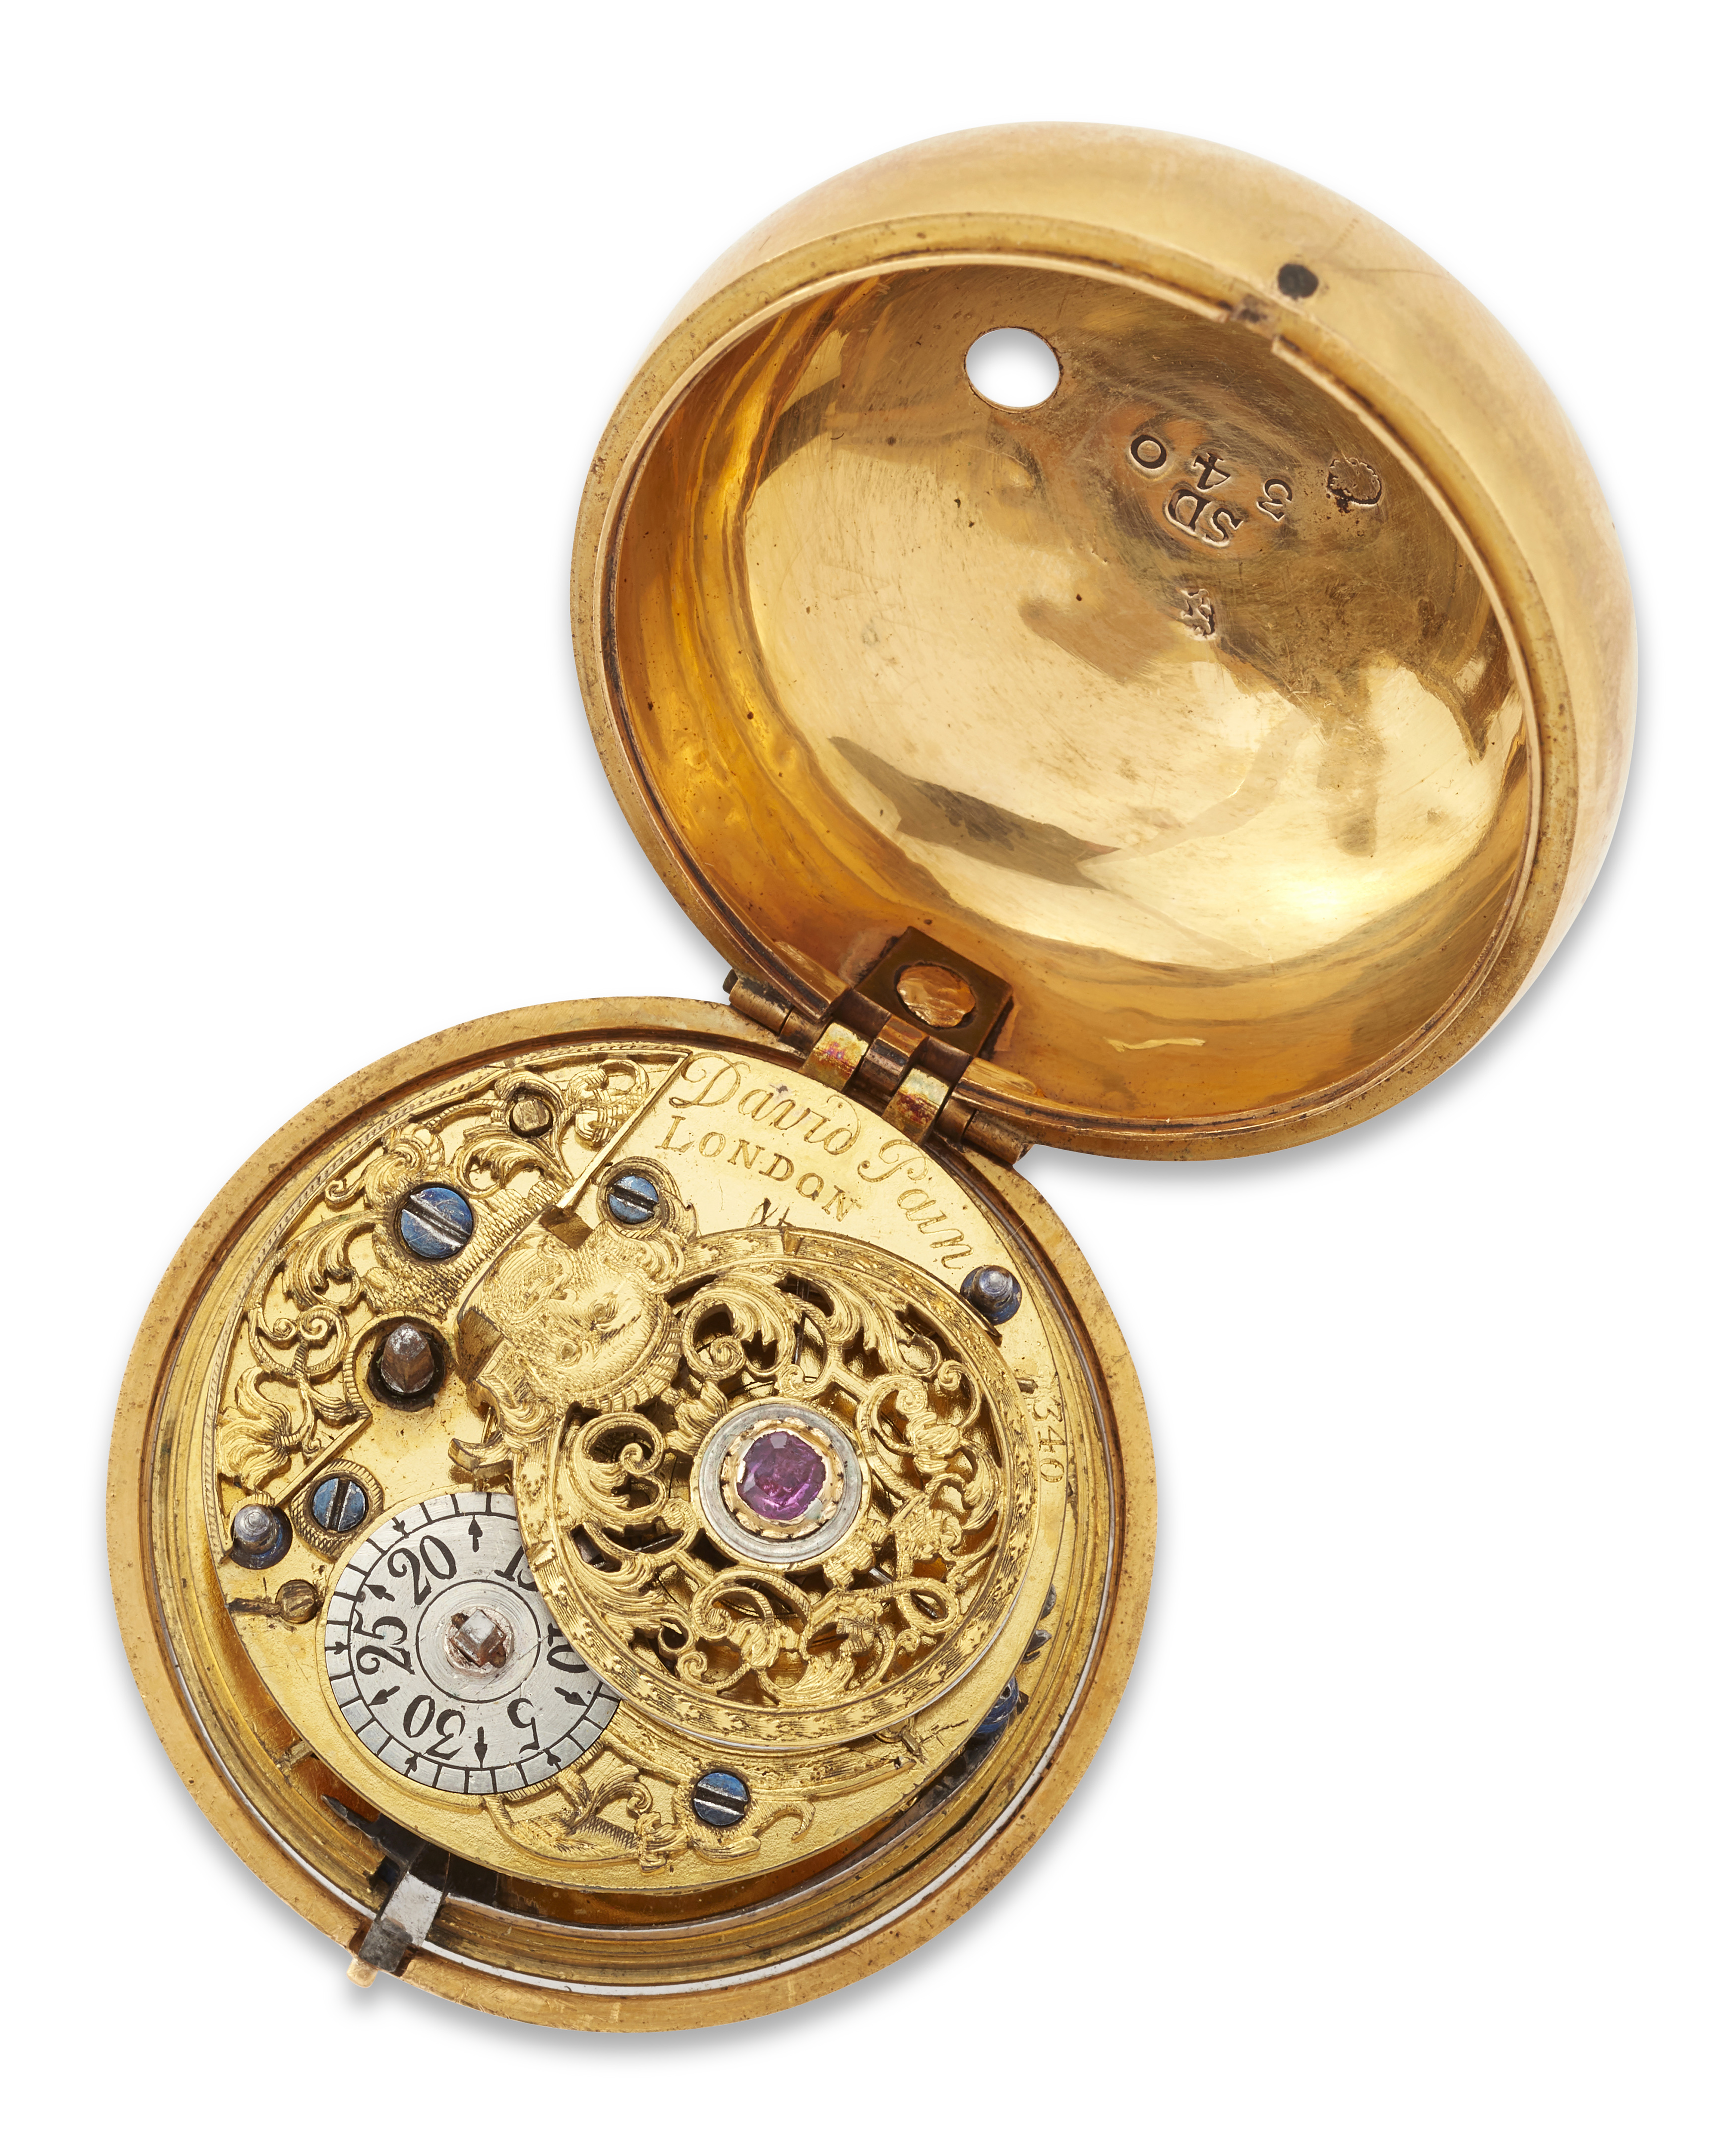 David Pain. An early 18th century gold repoussé pair case pocket watch Circa 1725 Gilt full plate... - Image 3 of 3